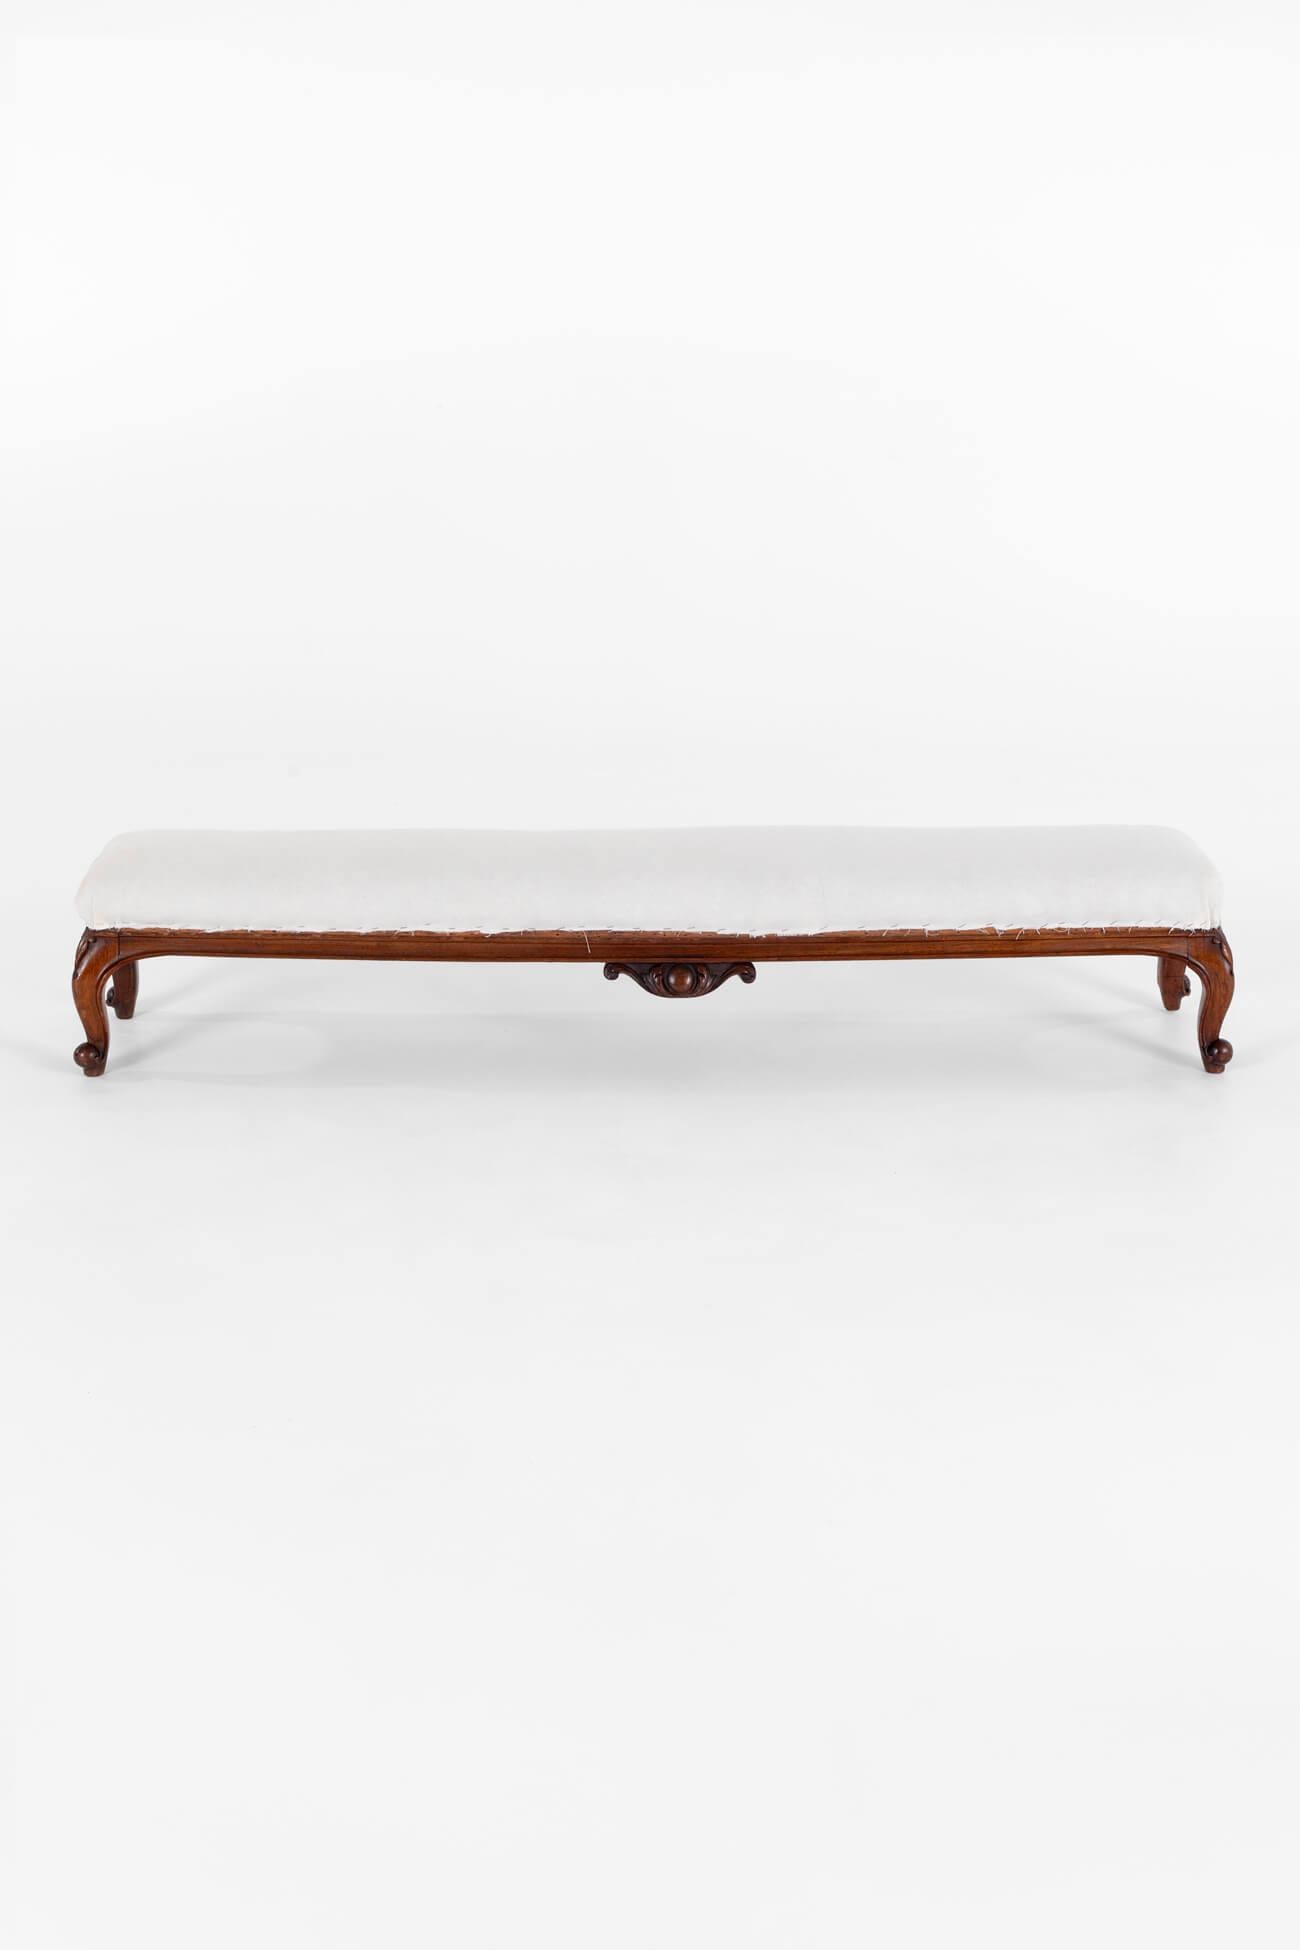 High Victorian Long Victorian Footstool For Sale